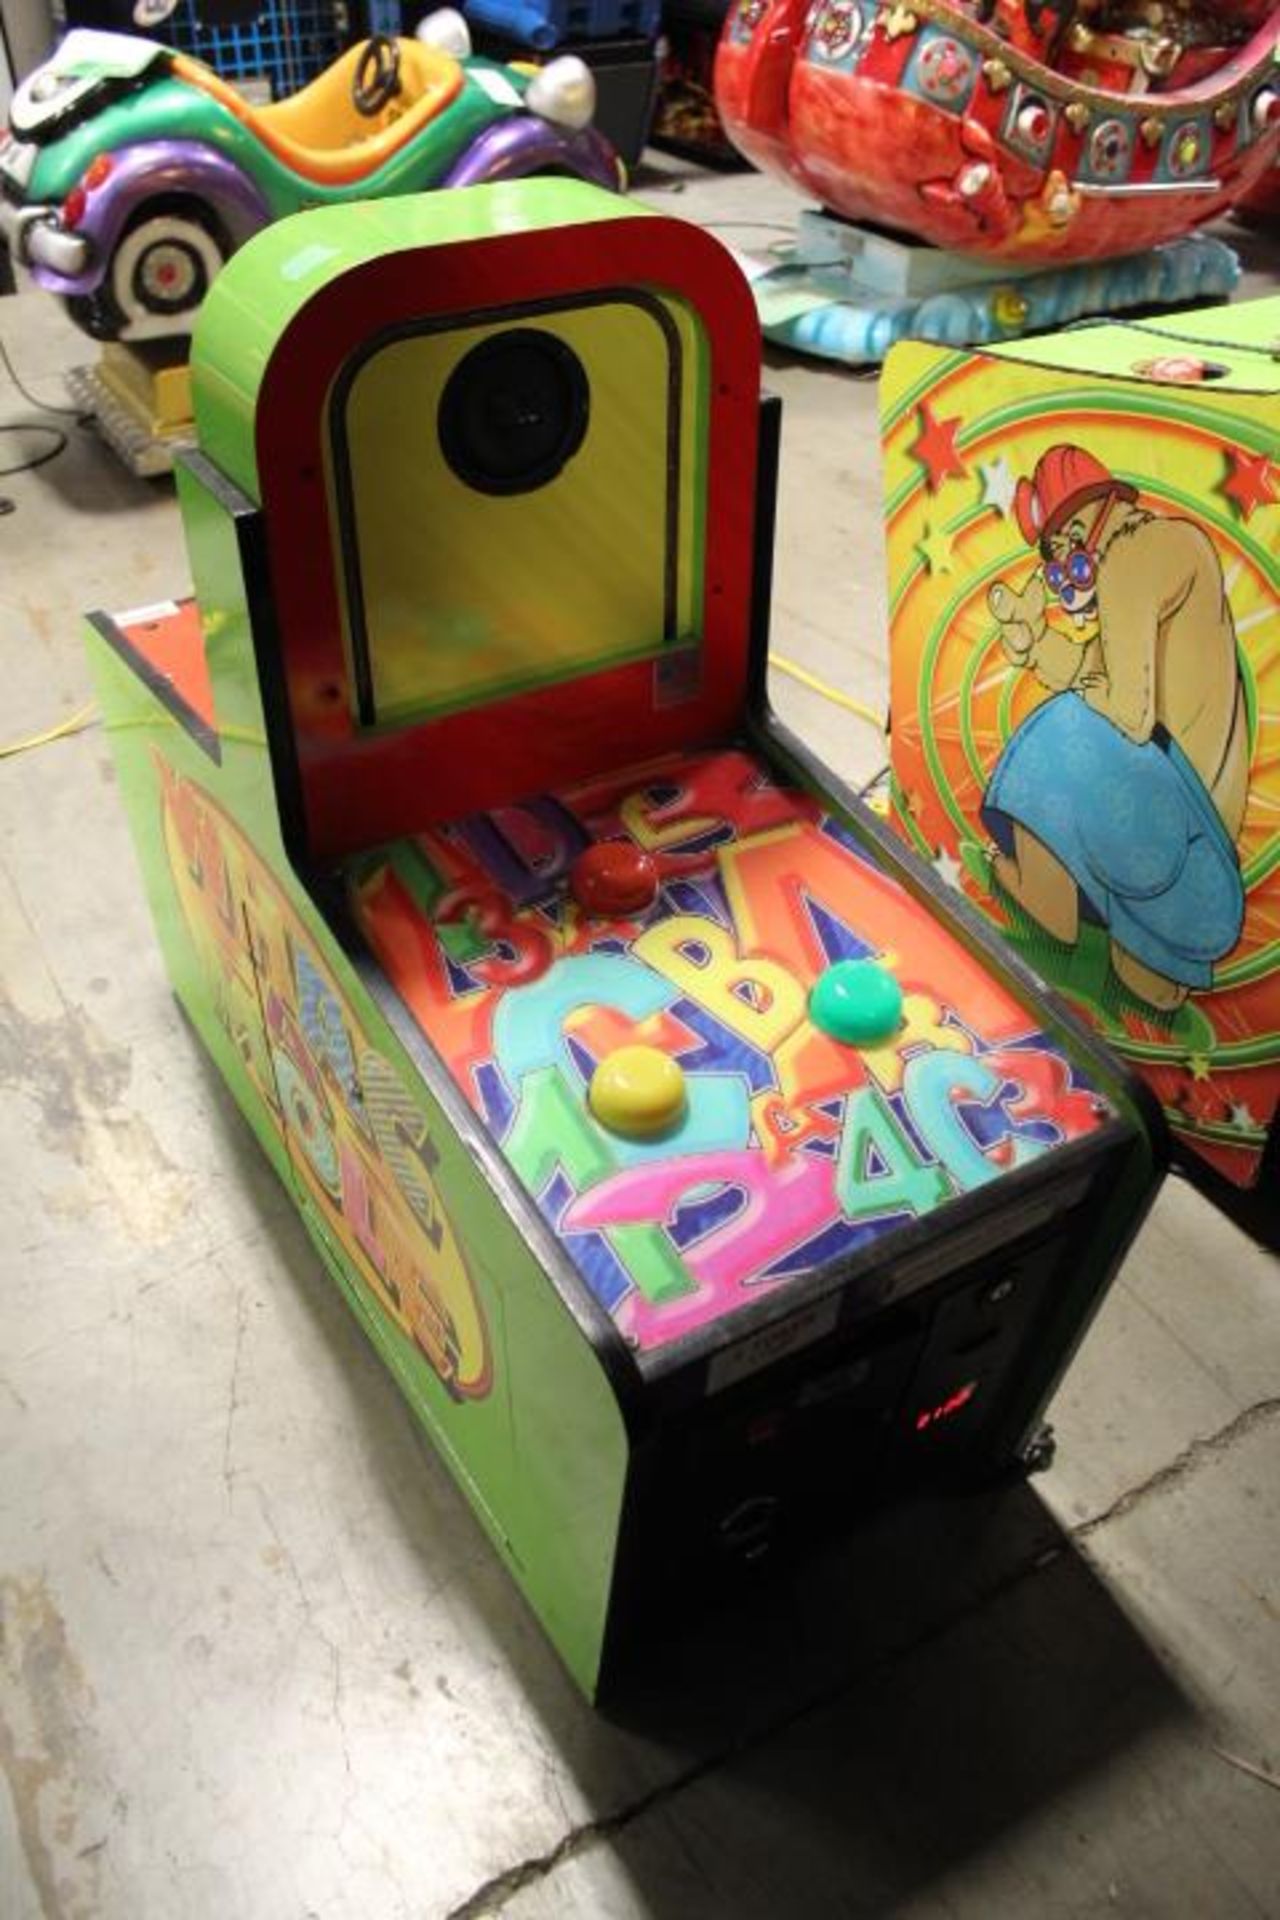 1X, SMALL WHACK-A-MOLE DOUBLE GAME - AS IS PARTS ONLY